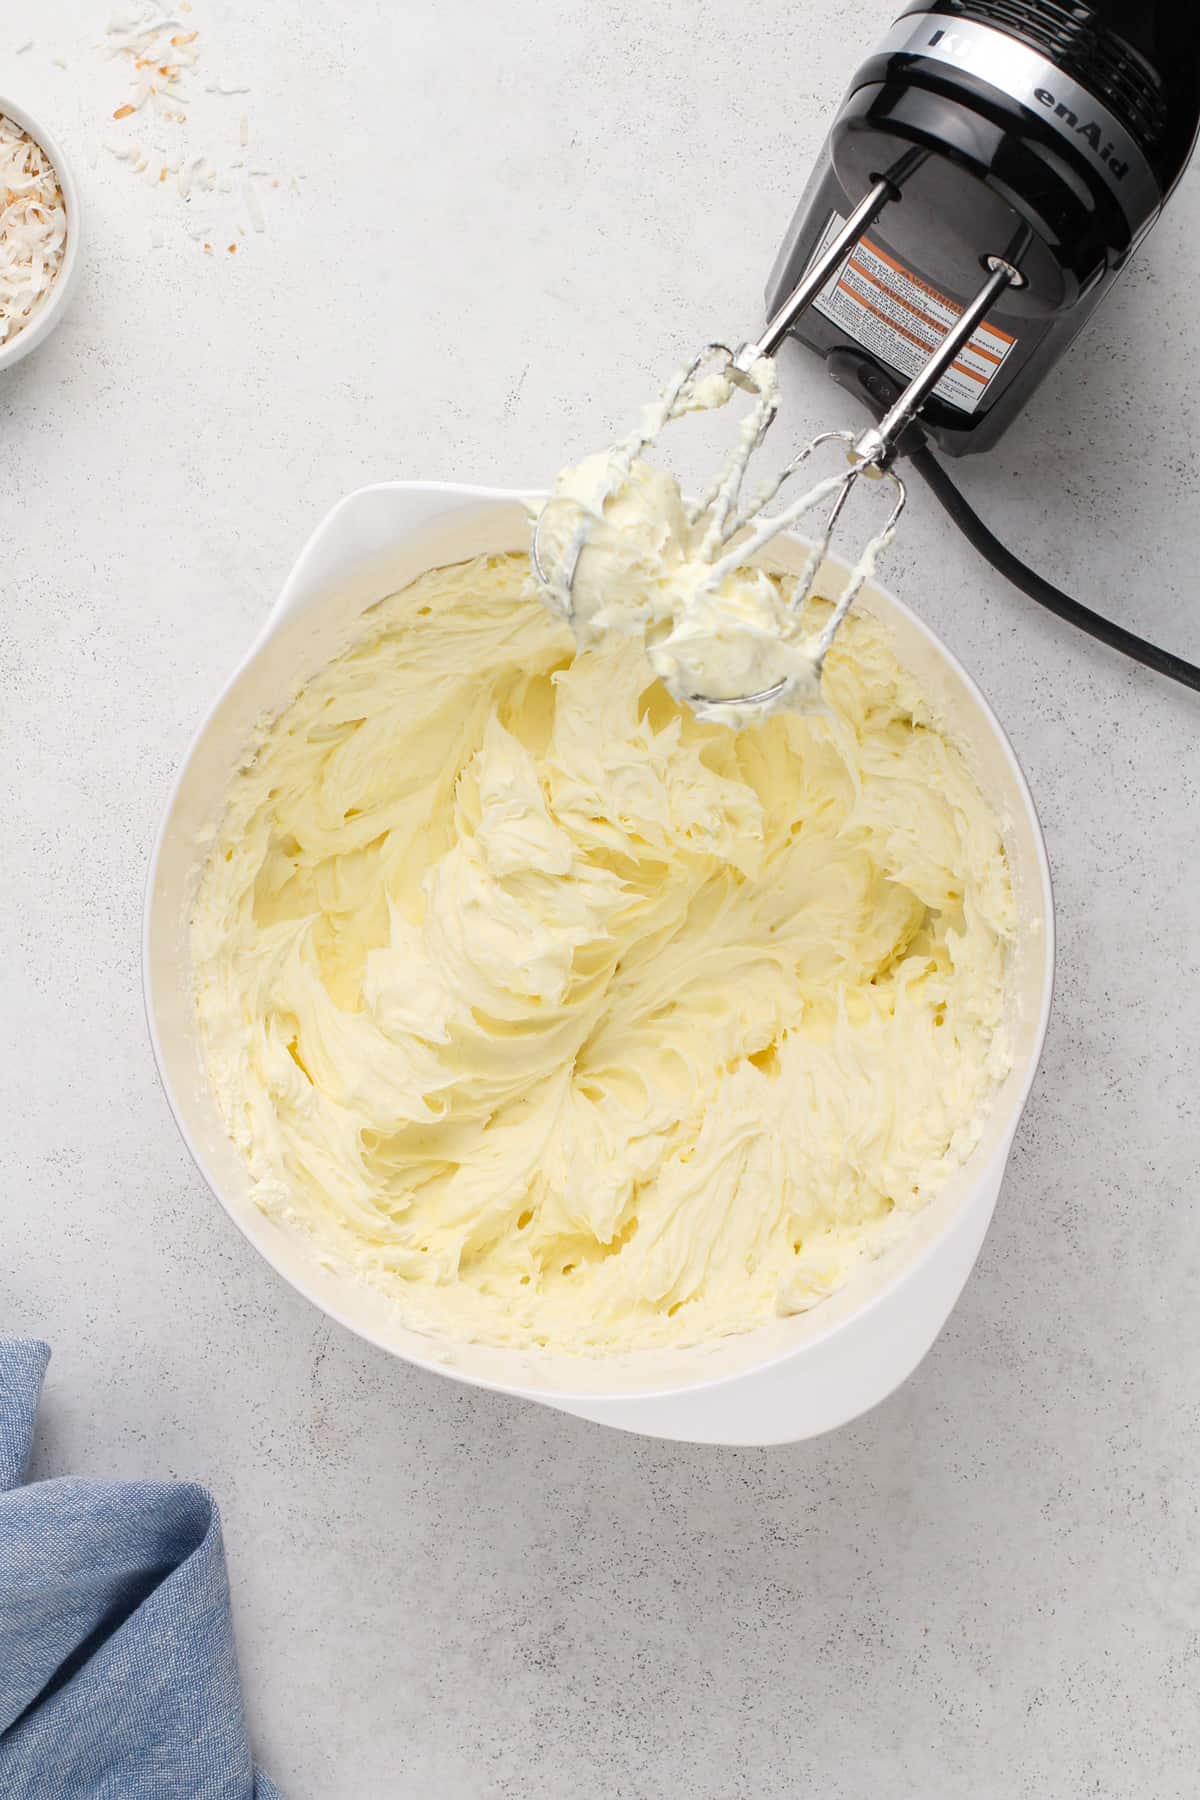 Cream cheese whipped with sugar in a white mixing bowl.